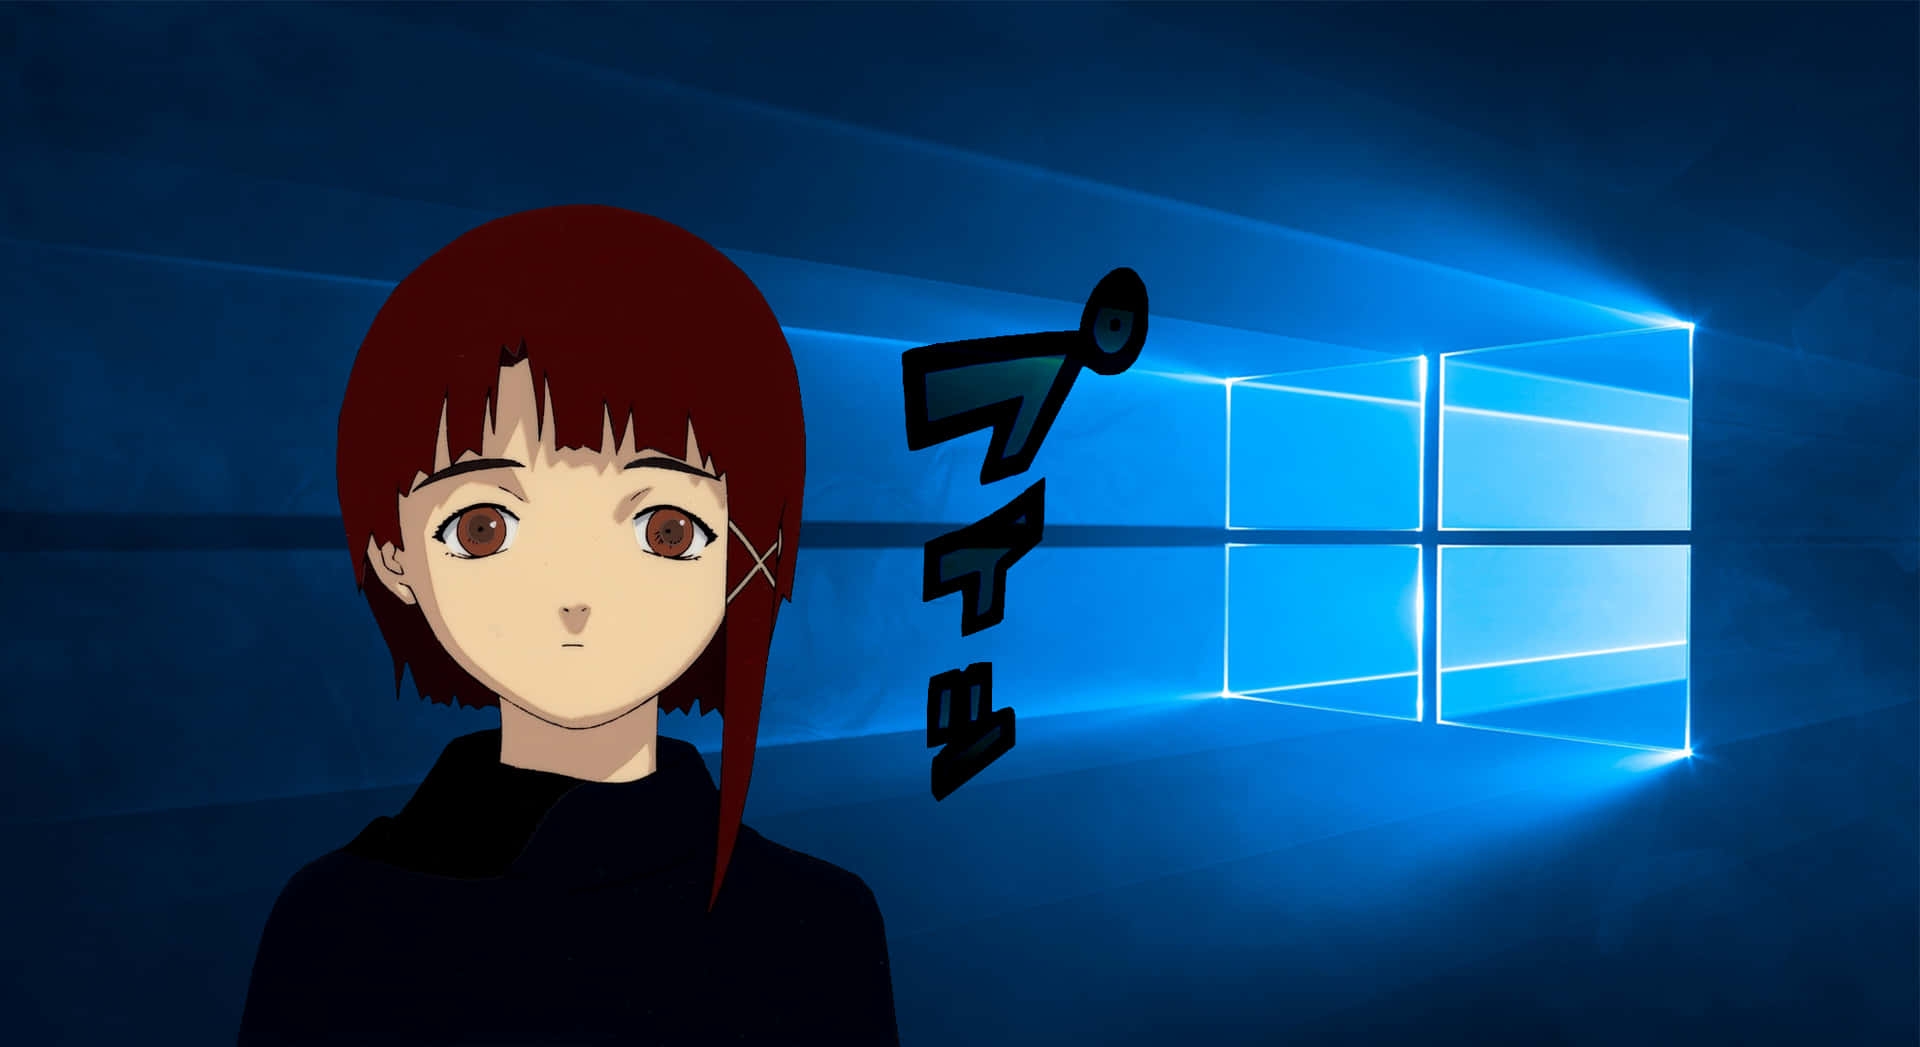 "Discover the World of Serial Experiments Lain" Wallpaper